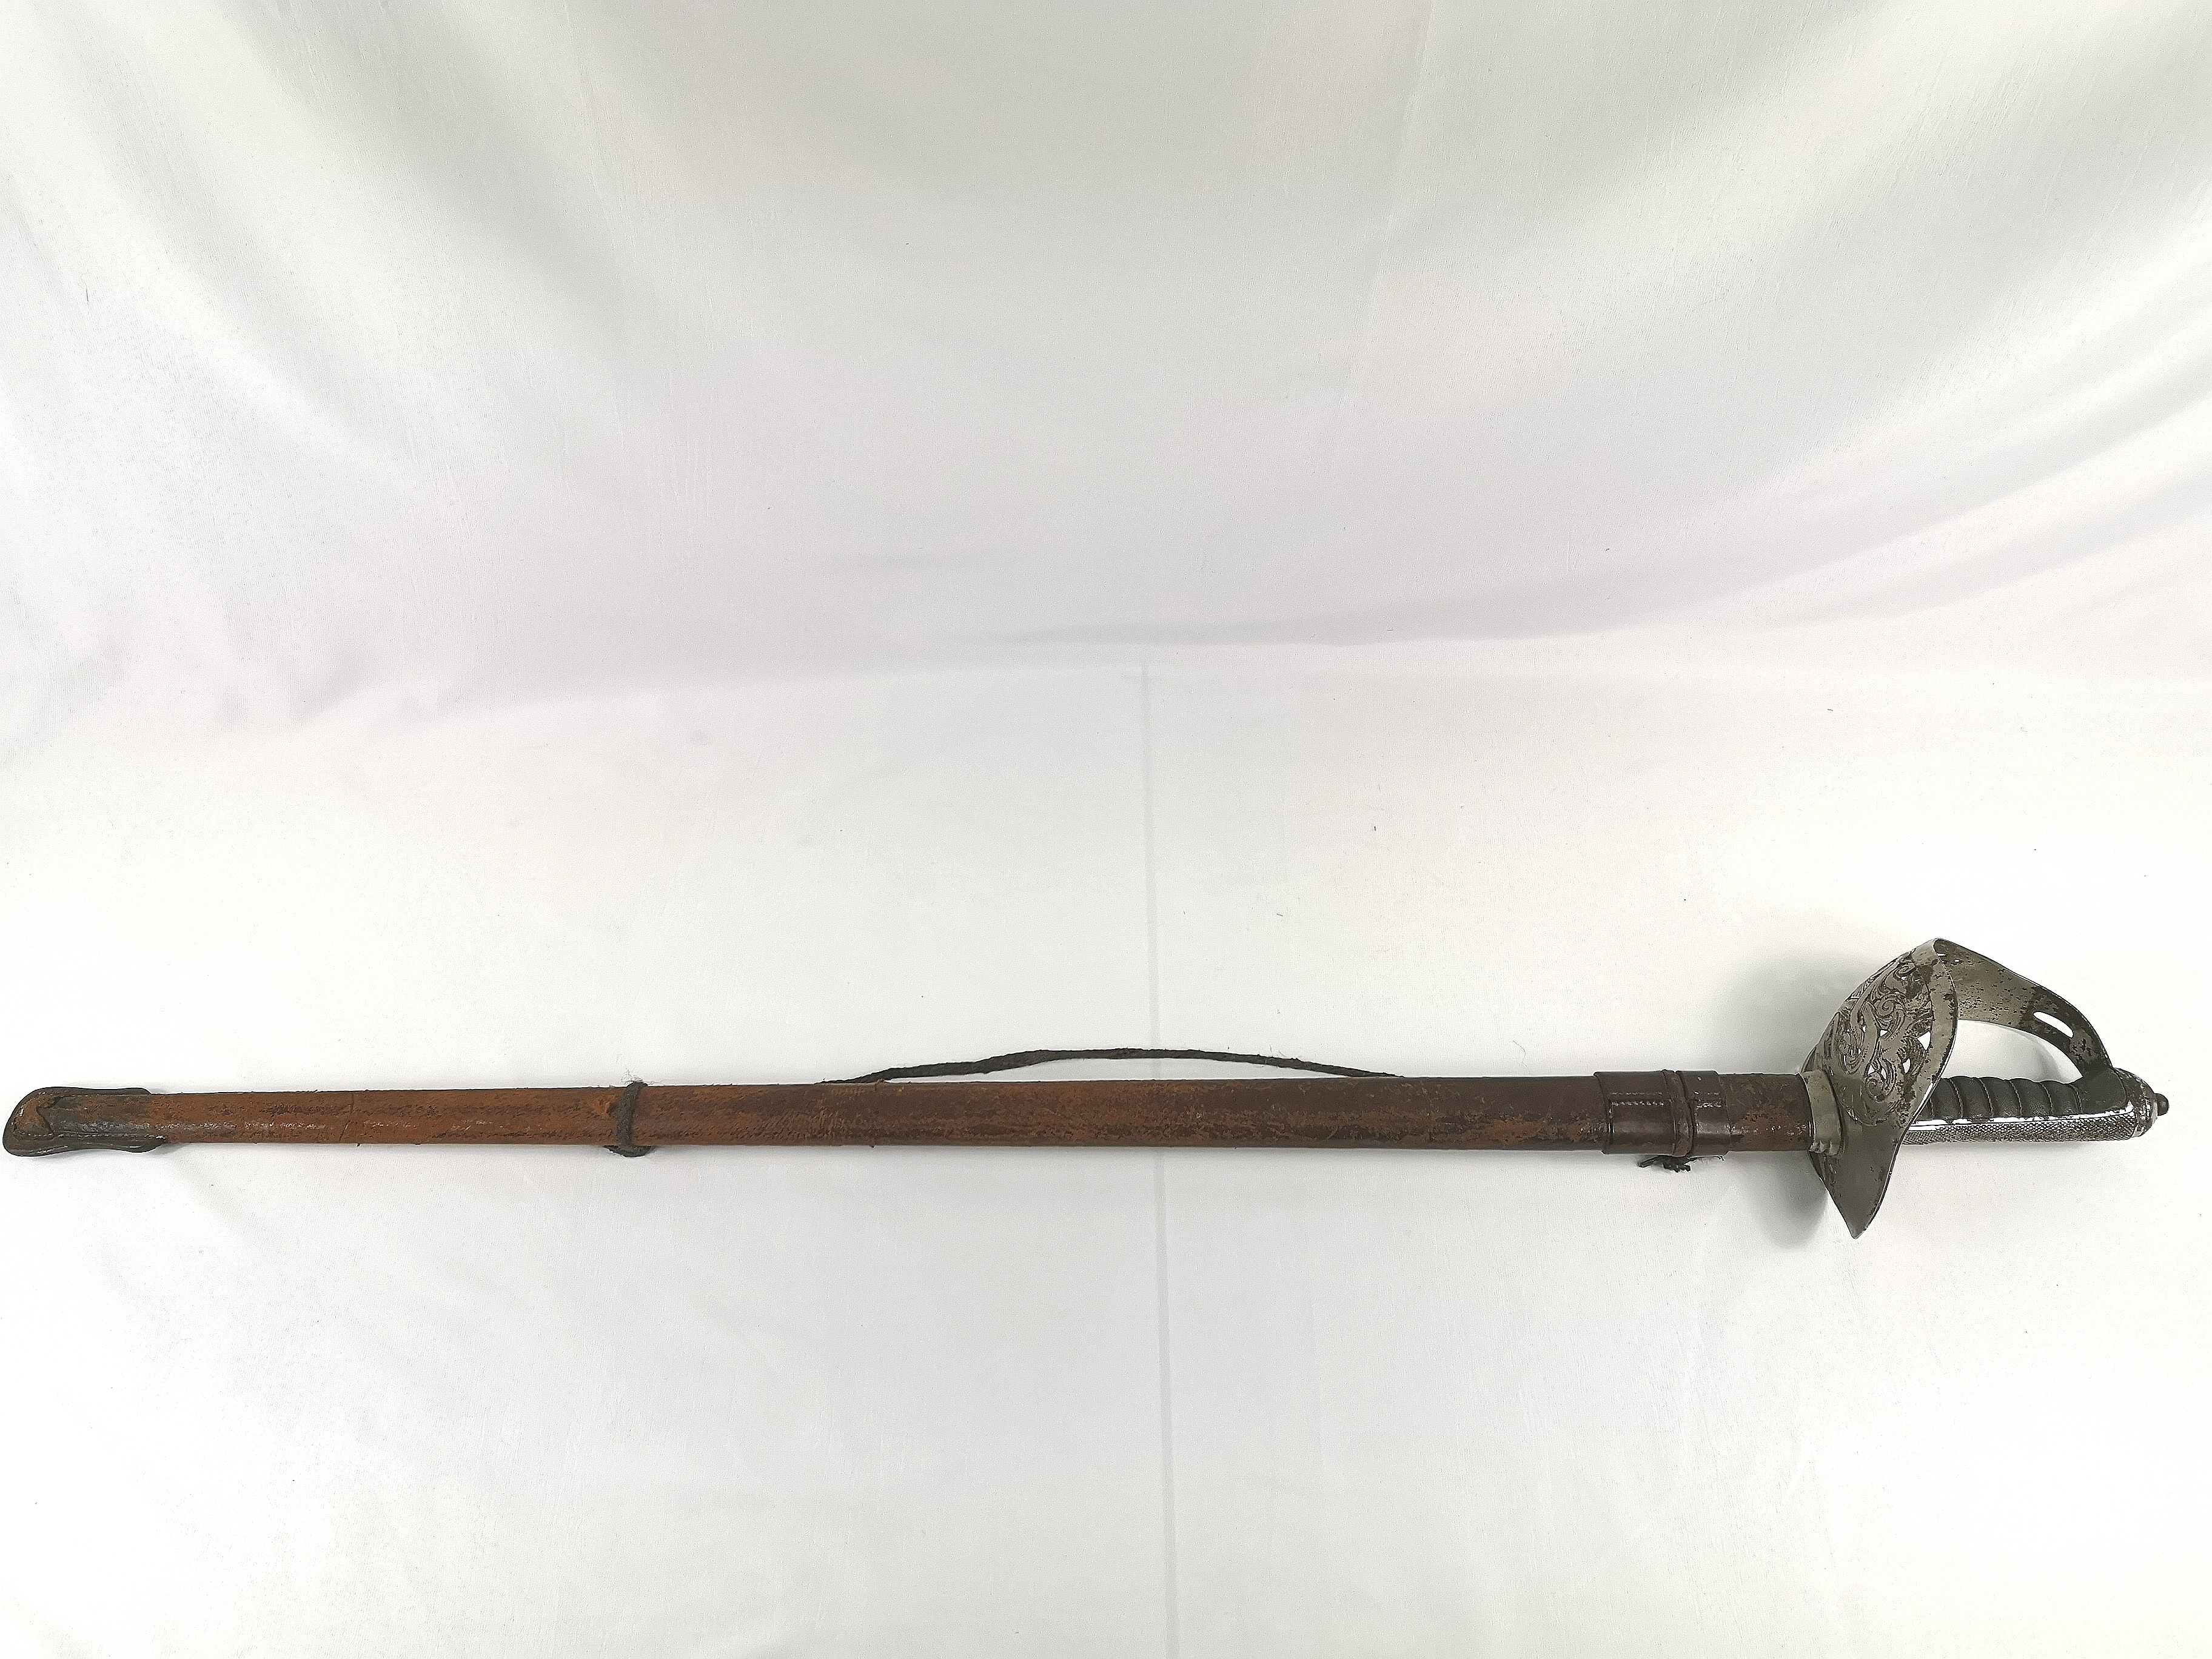 Dress sword with leather scabbard